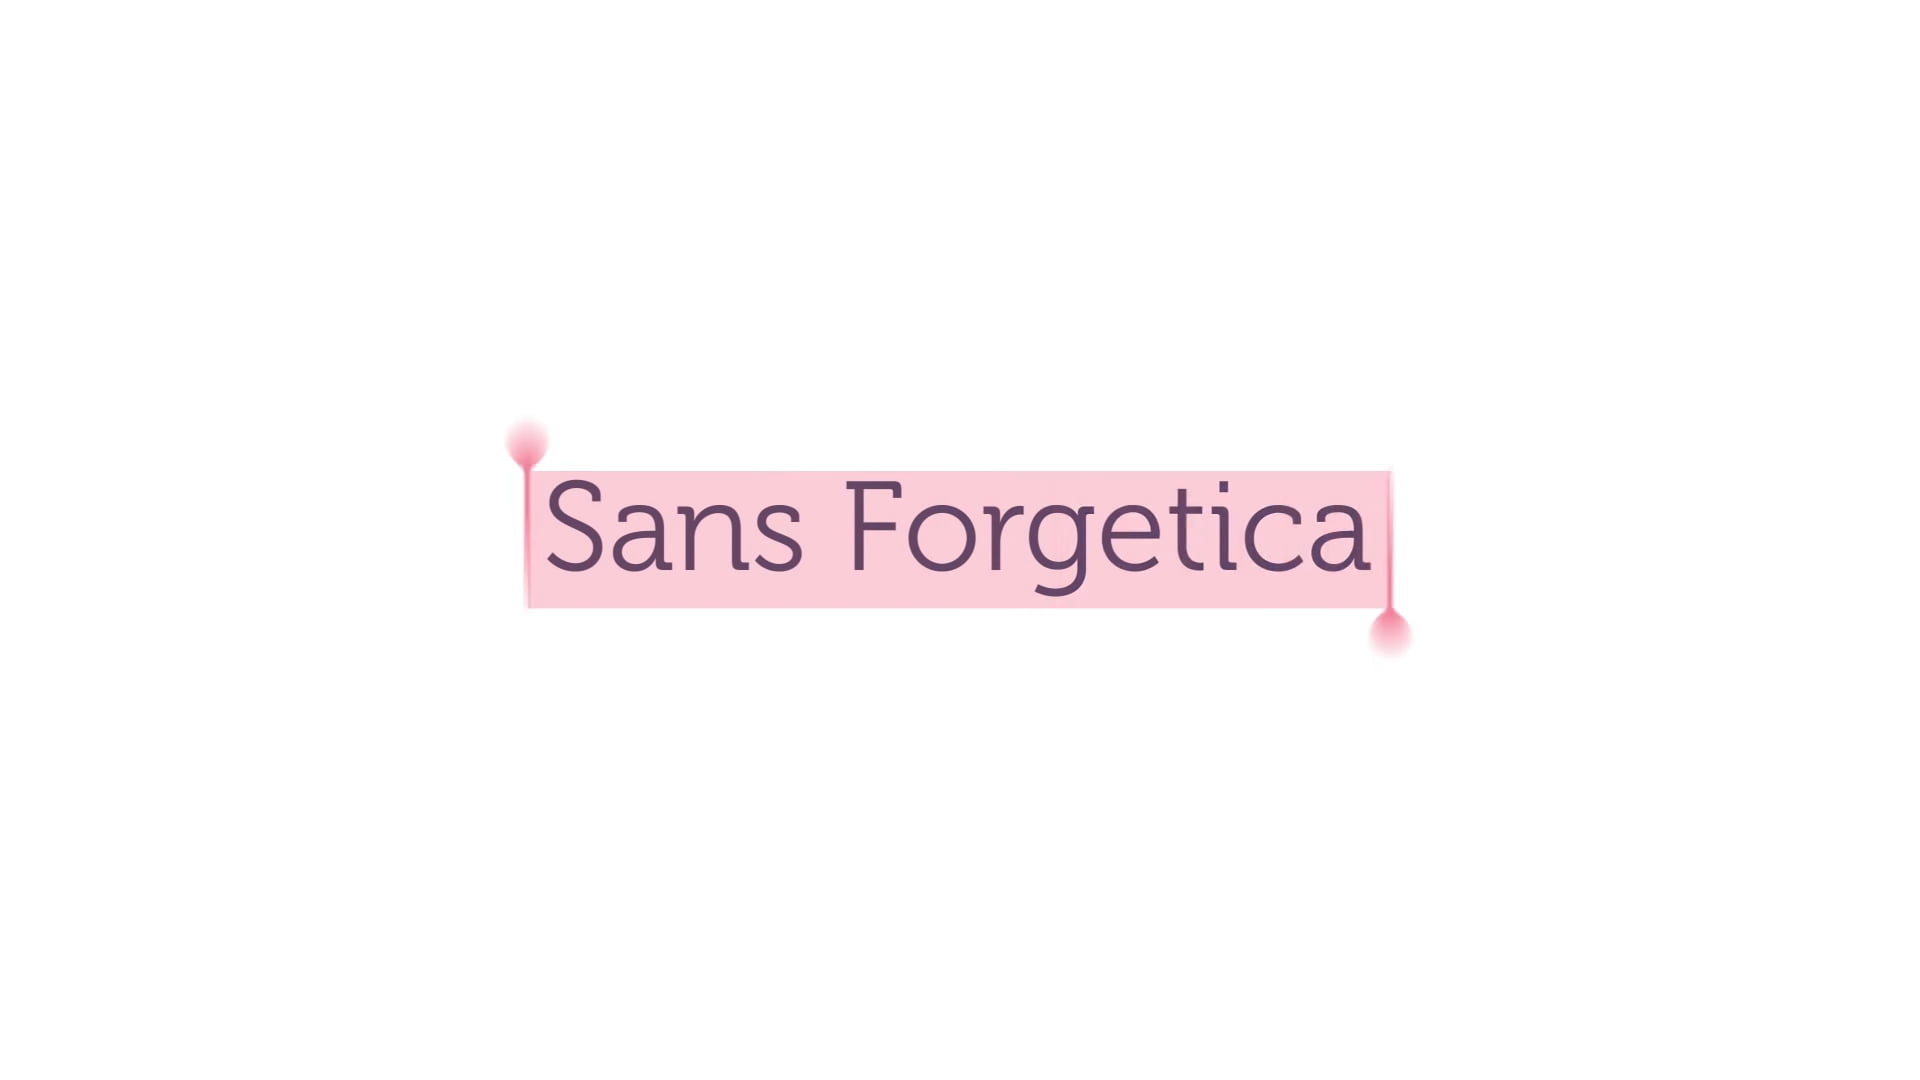 Sans forgetica